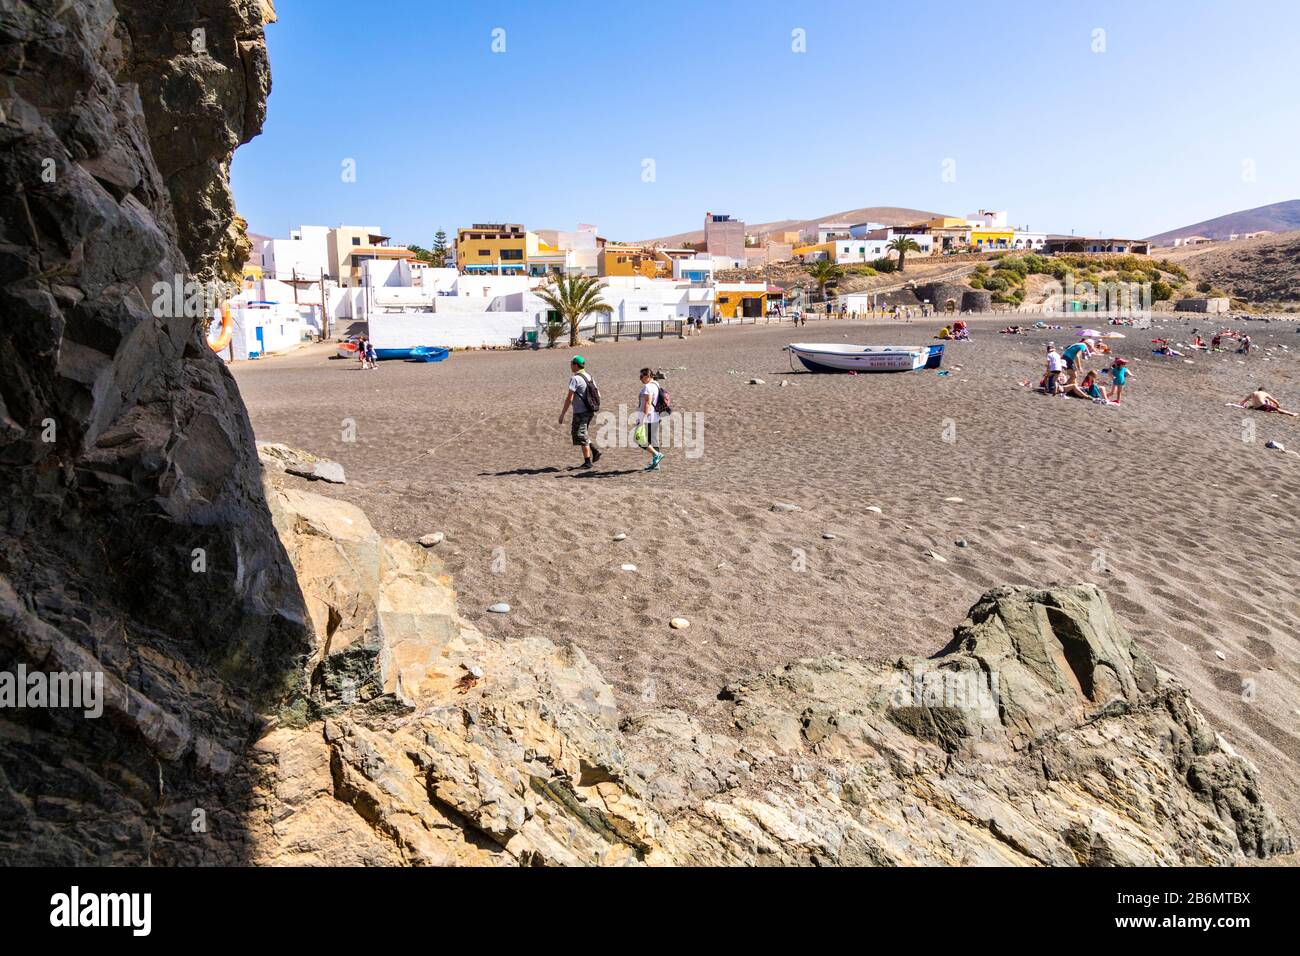 Tourists on the beach at Ajuy on the west coast of the Canary Island of Fuerteventura Stock Photo